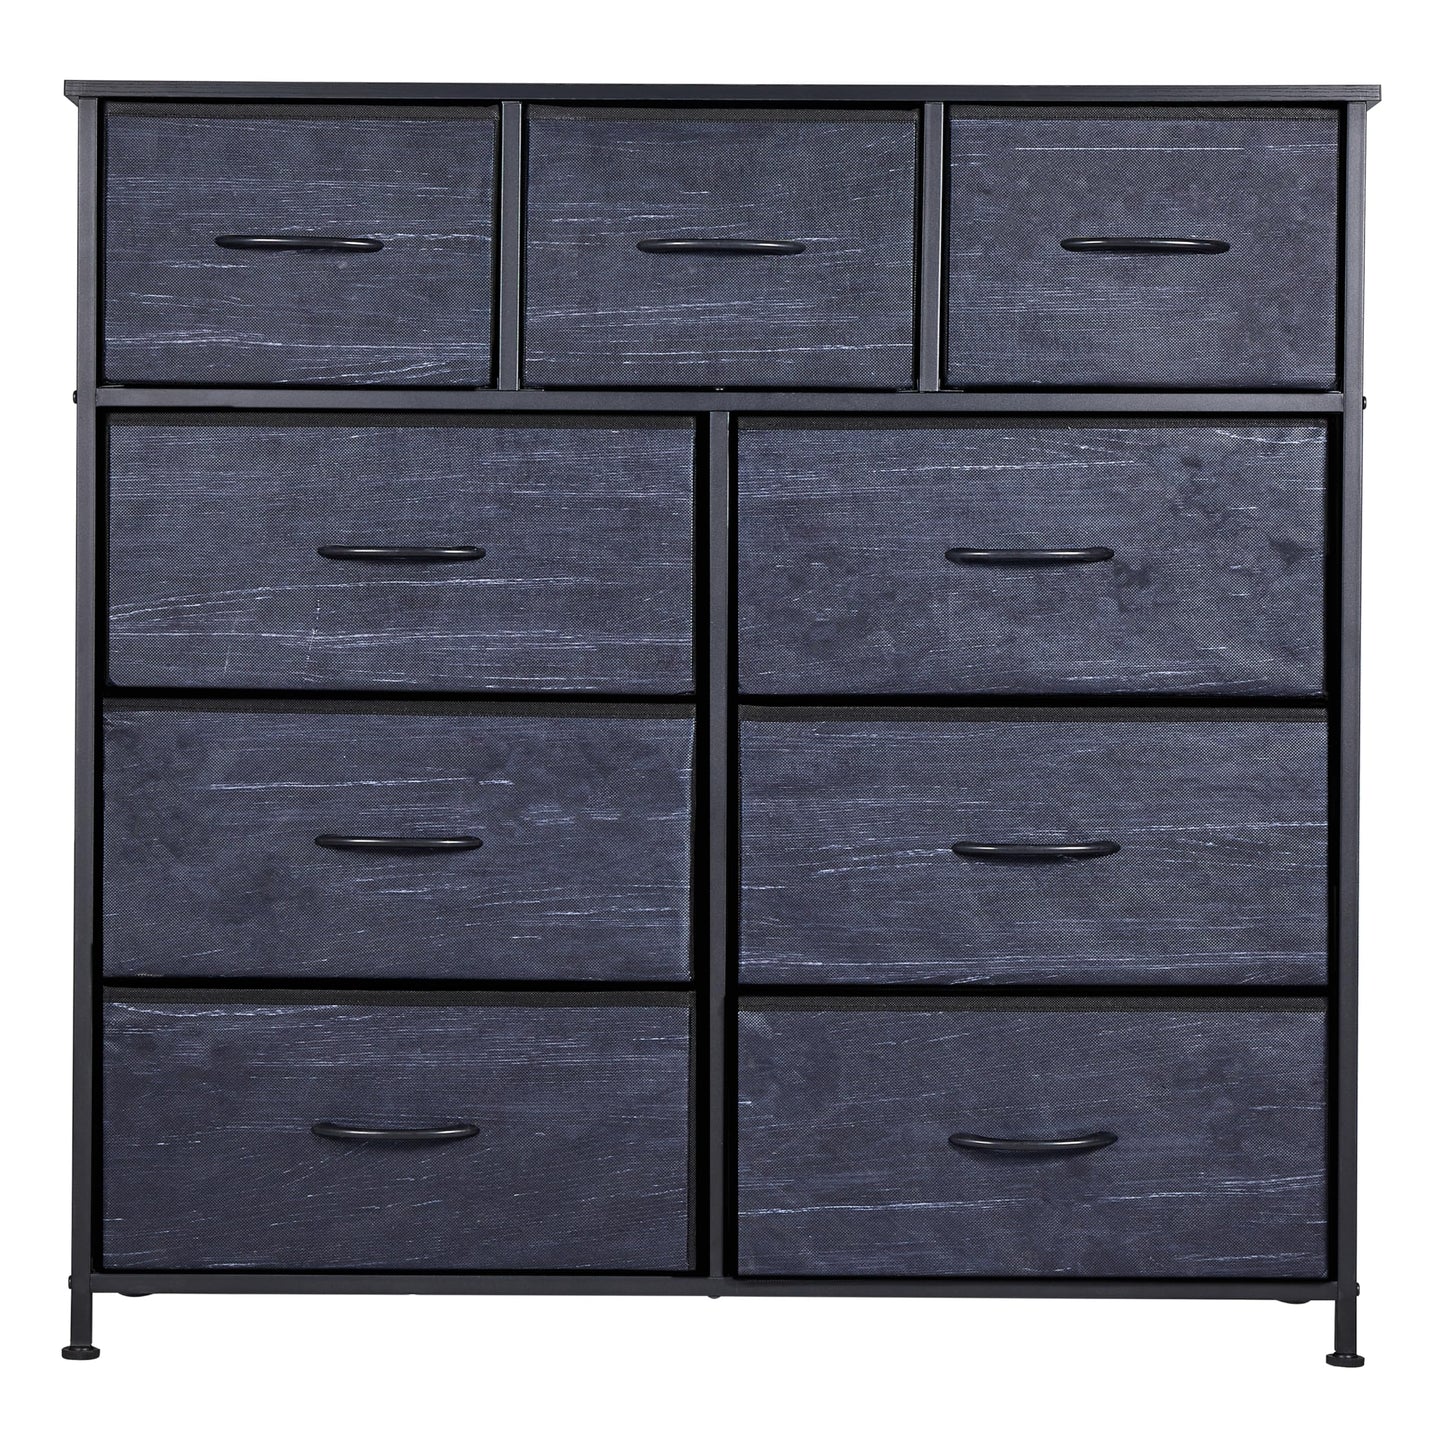 Tall Dresser for Bedroom with 9 Drawers, Storage Dresser Organizer Unit, Fabric Dresser for Bedroom, Closet, Chest of Drawers with Fabric Bins, Steel